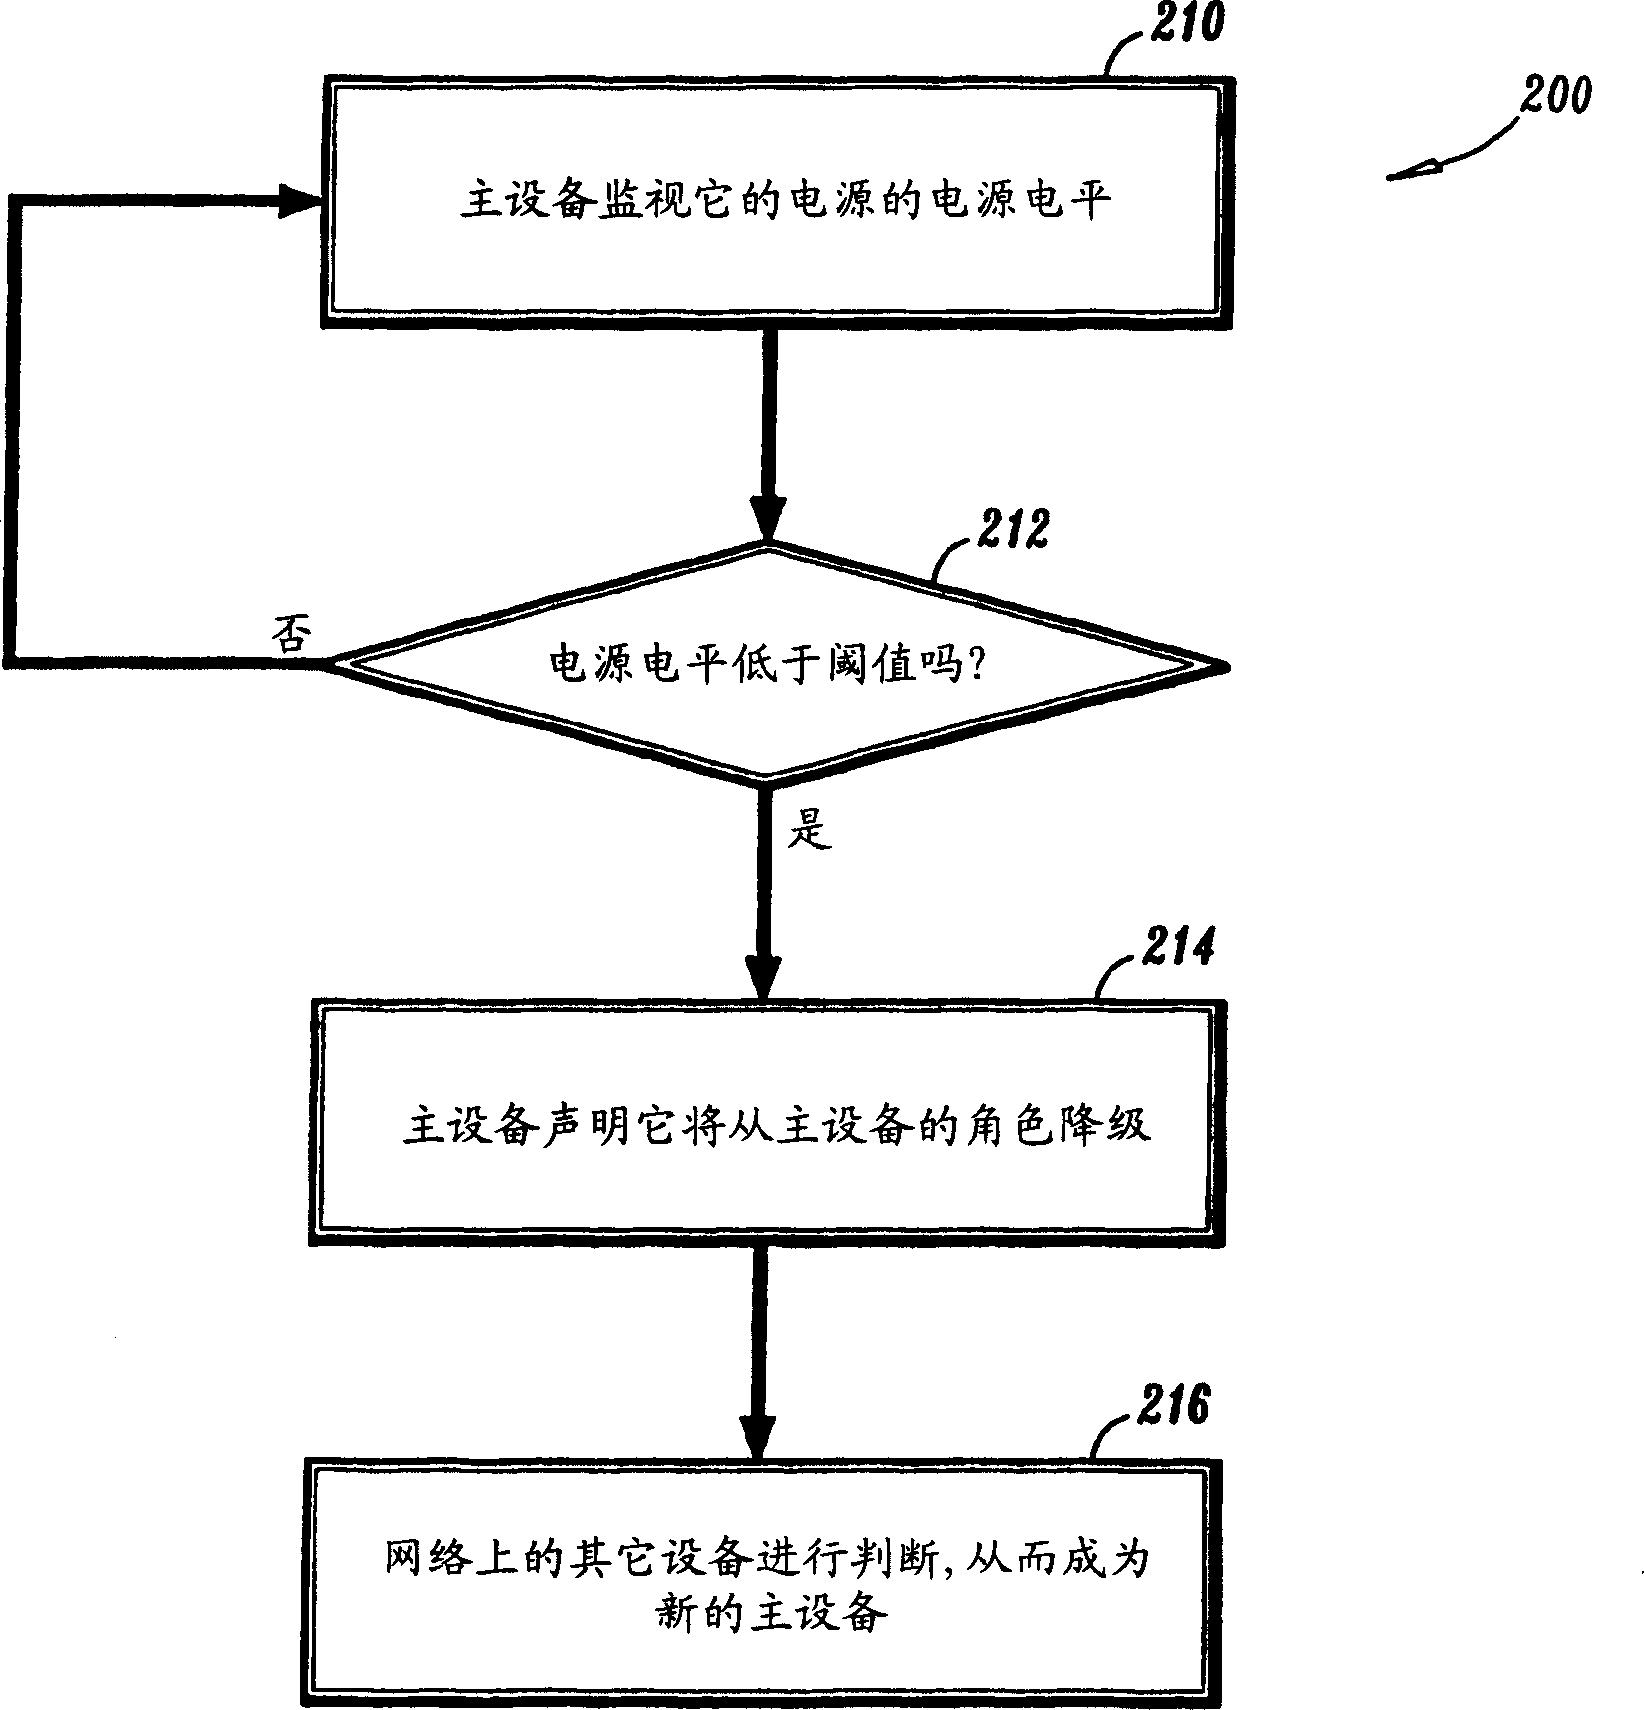 Mechanism for a wireless device to relinquish its network master status based on its power reserve